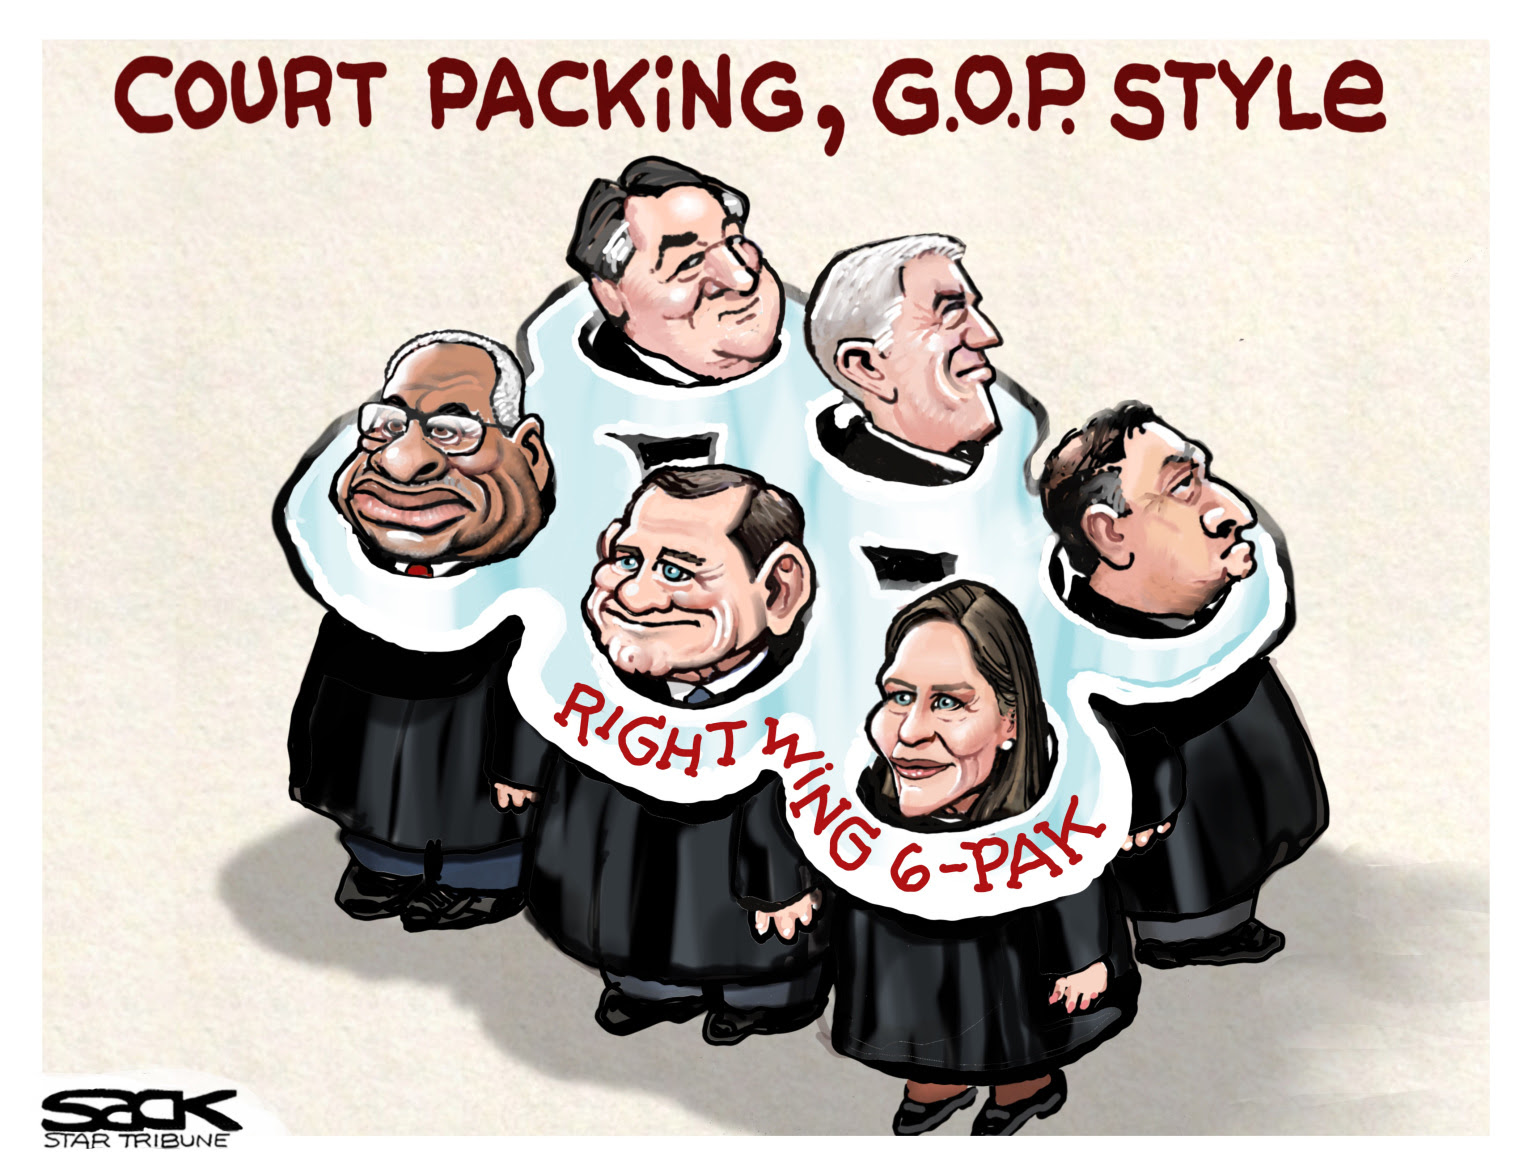 Republicans pack the Supreme Court with conservative, partisan judges.